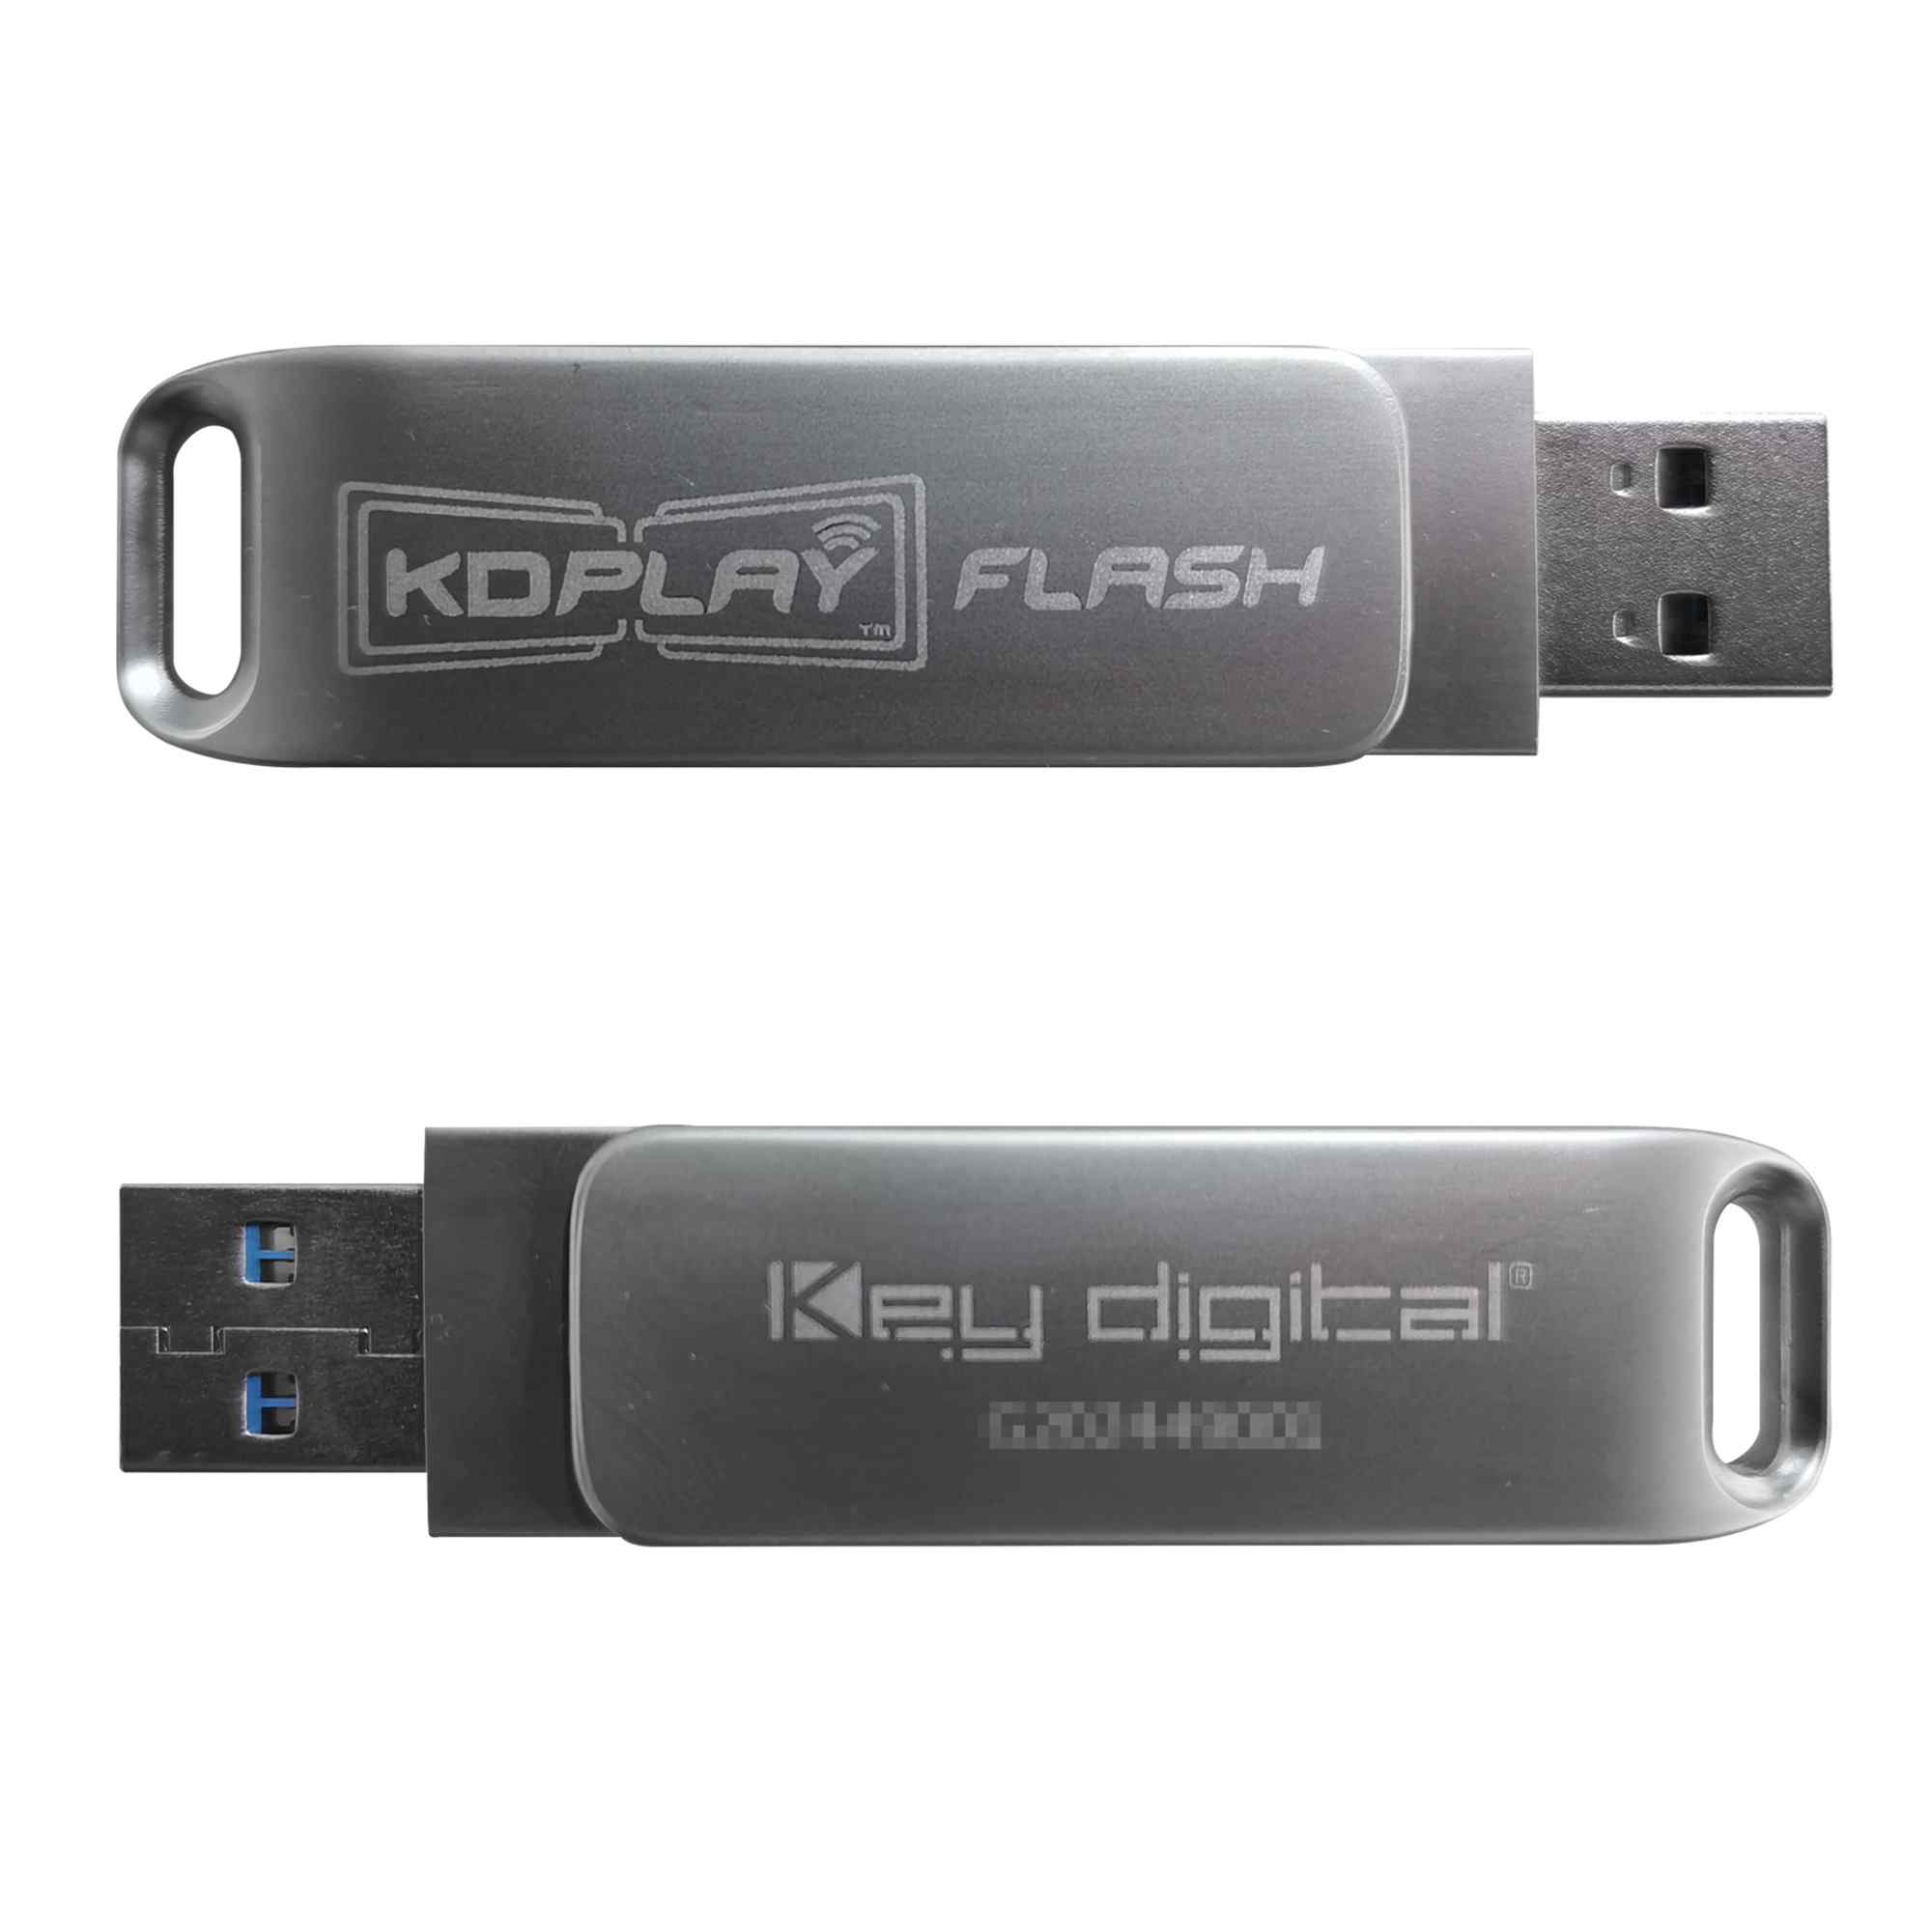 Thumbnail of key digital usb a male front and rear